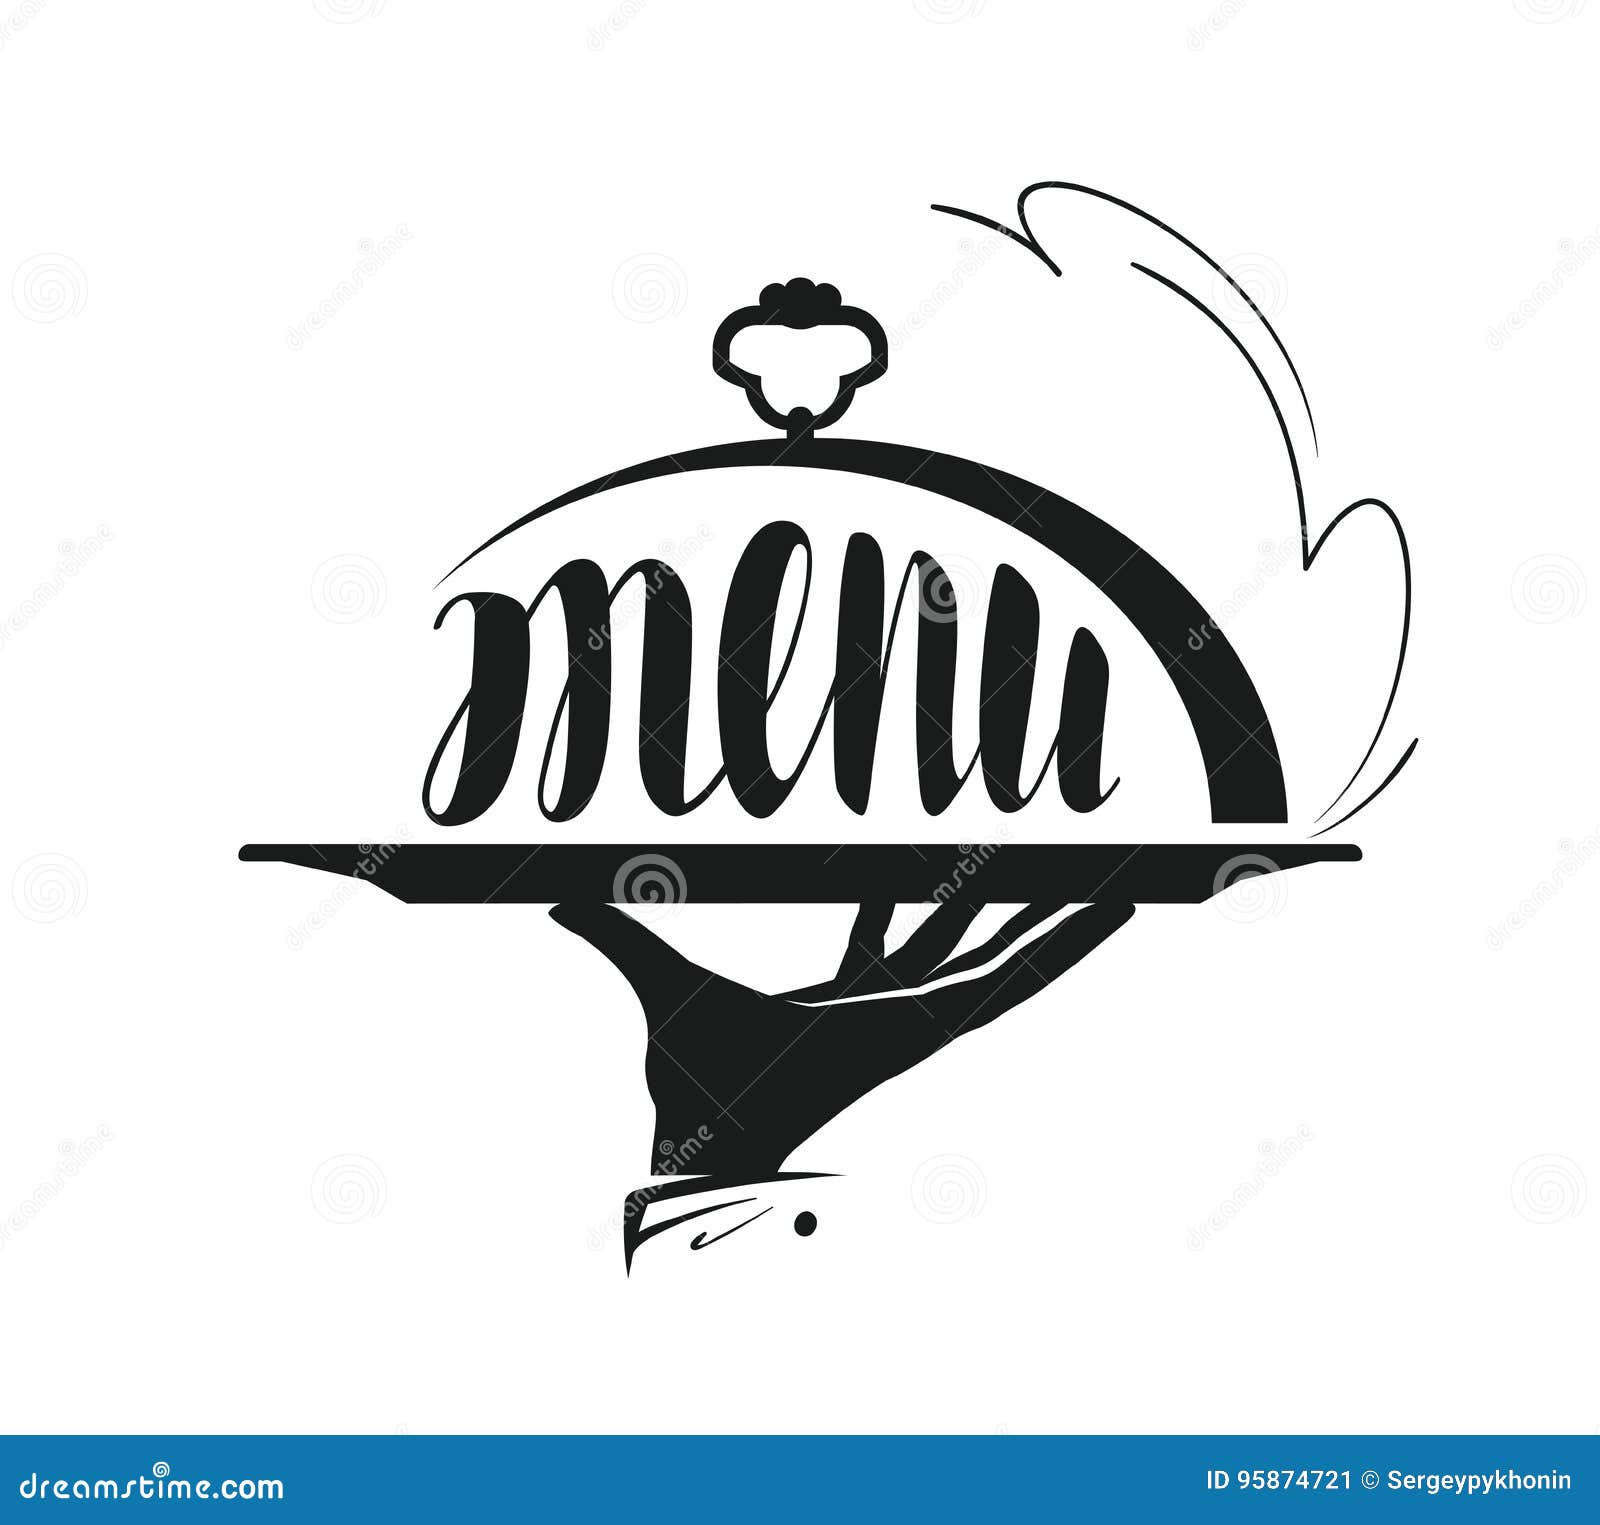 food service, catering logo. icon for  menu restaurant or cafe.